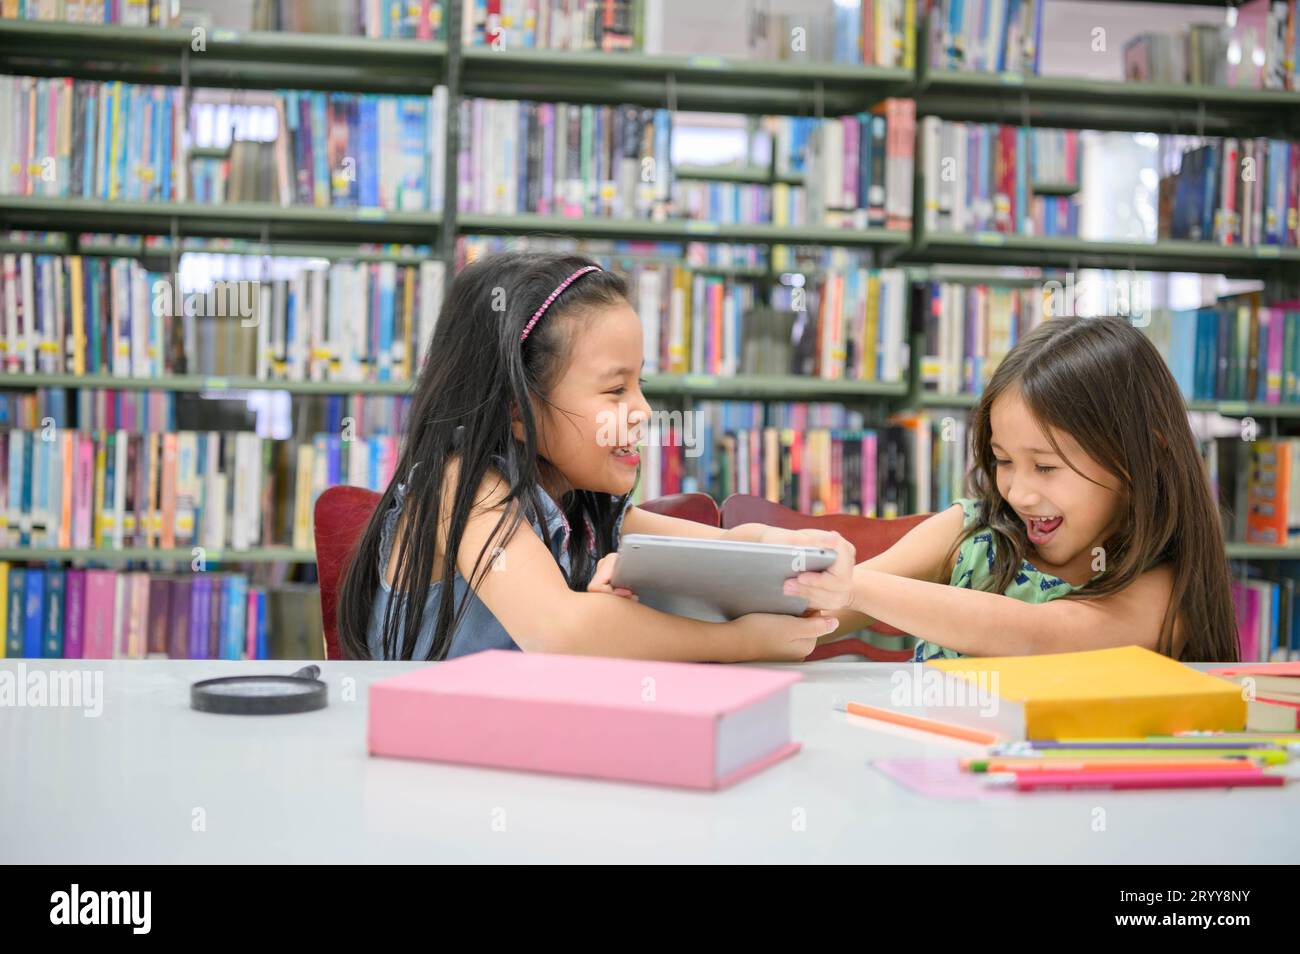 Two girls fighting for tablet in the classroom while reading books. People lifestyles and education. Young friendship and Kids r Stock Photo